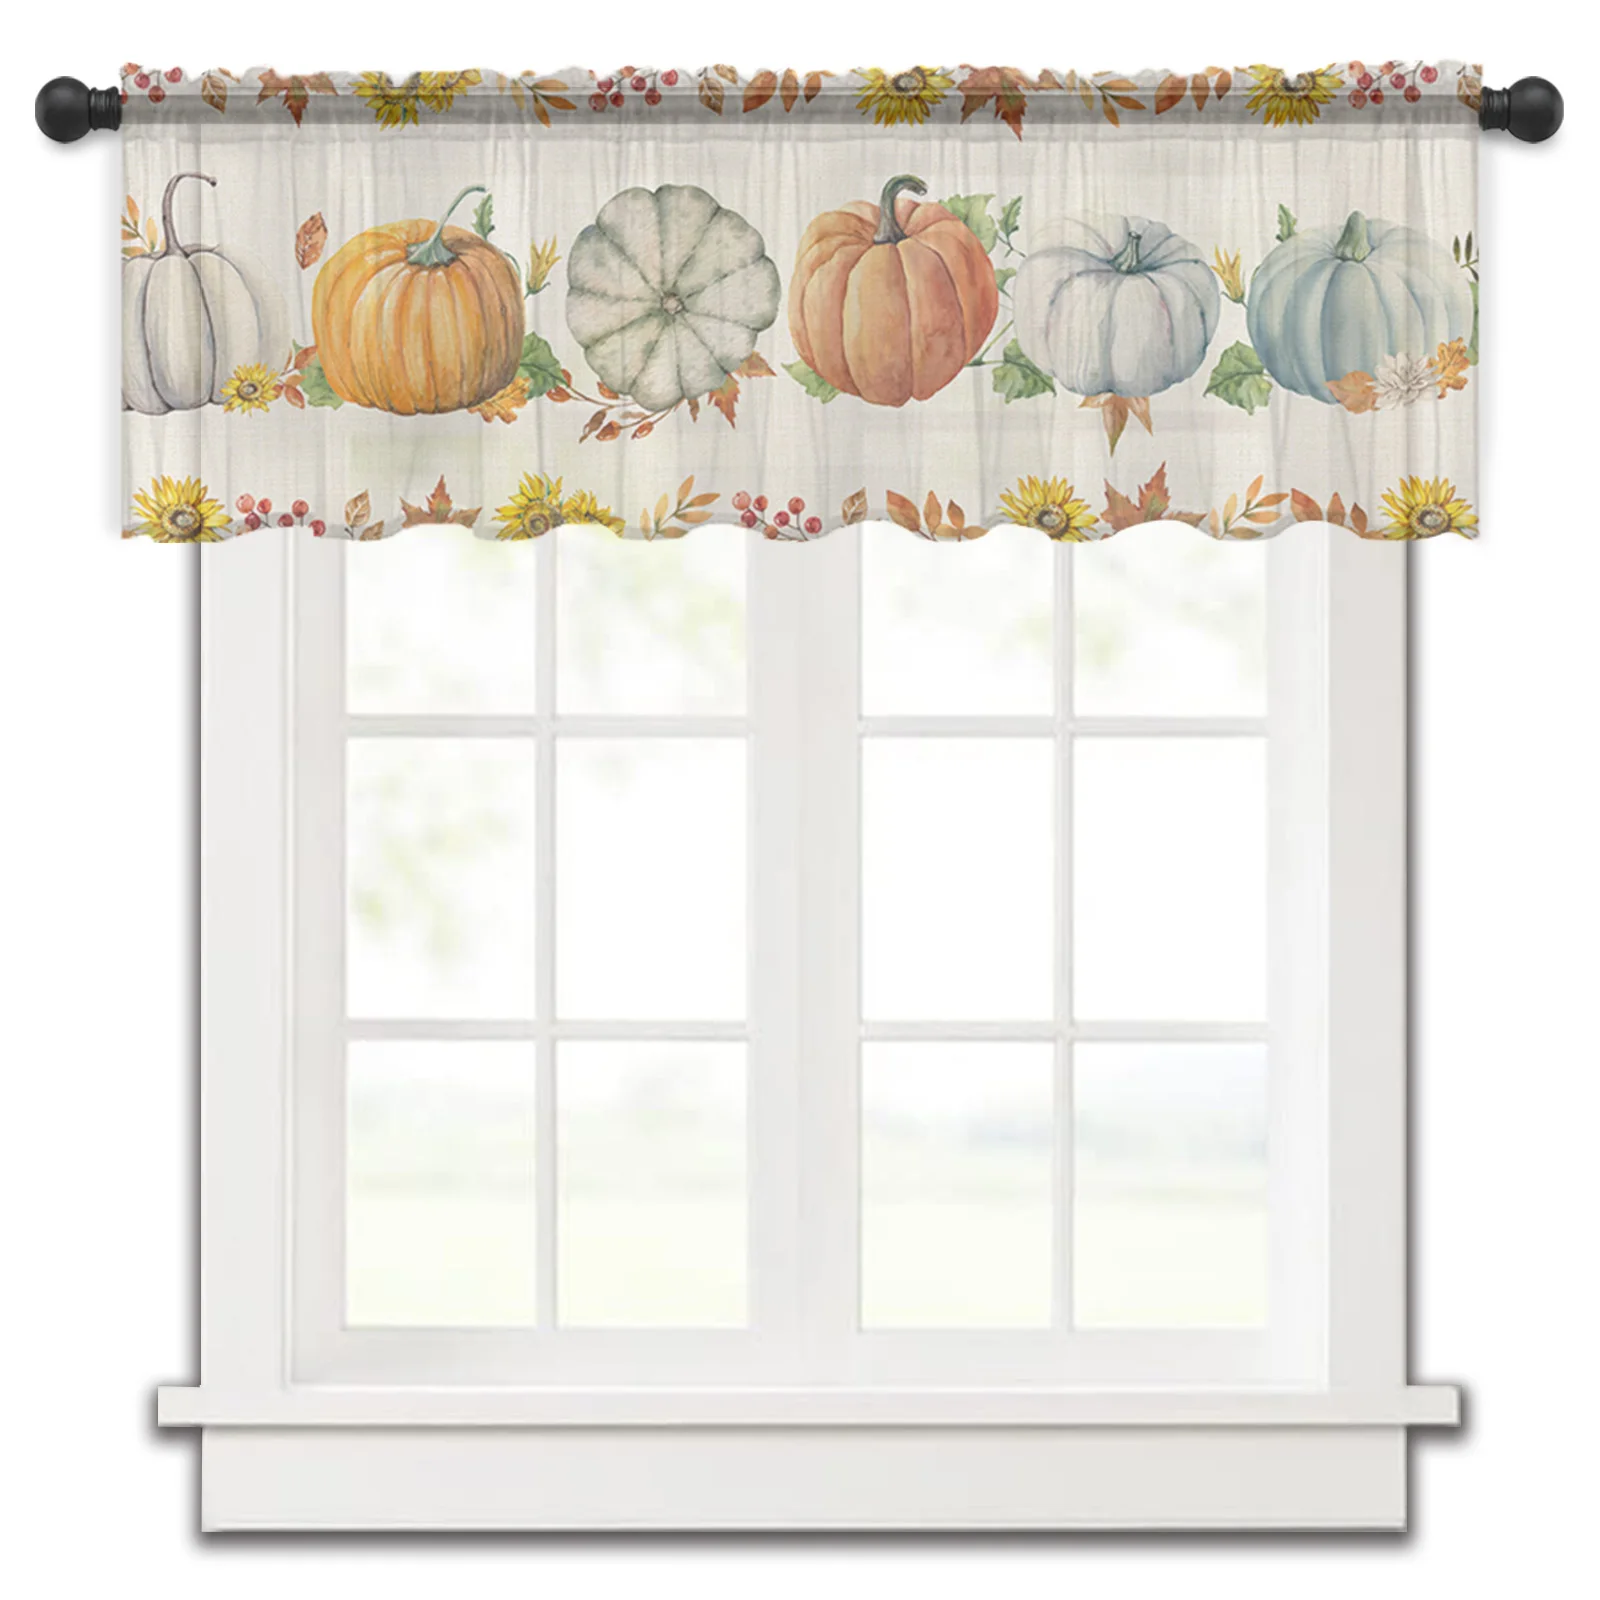 

Thanksgiving Fall Pumpkin Maple Leaf Kitchen Small Curtain Tulle Sheer Short Curtain Bedroom Living Room Home Decor Voile Drapes